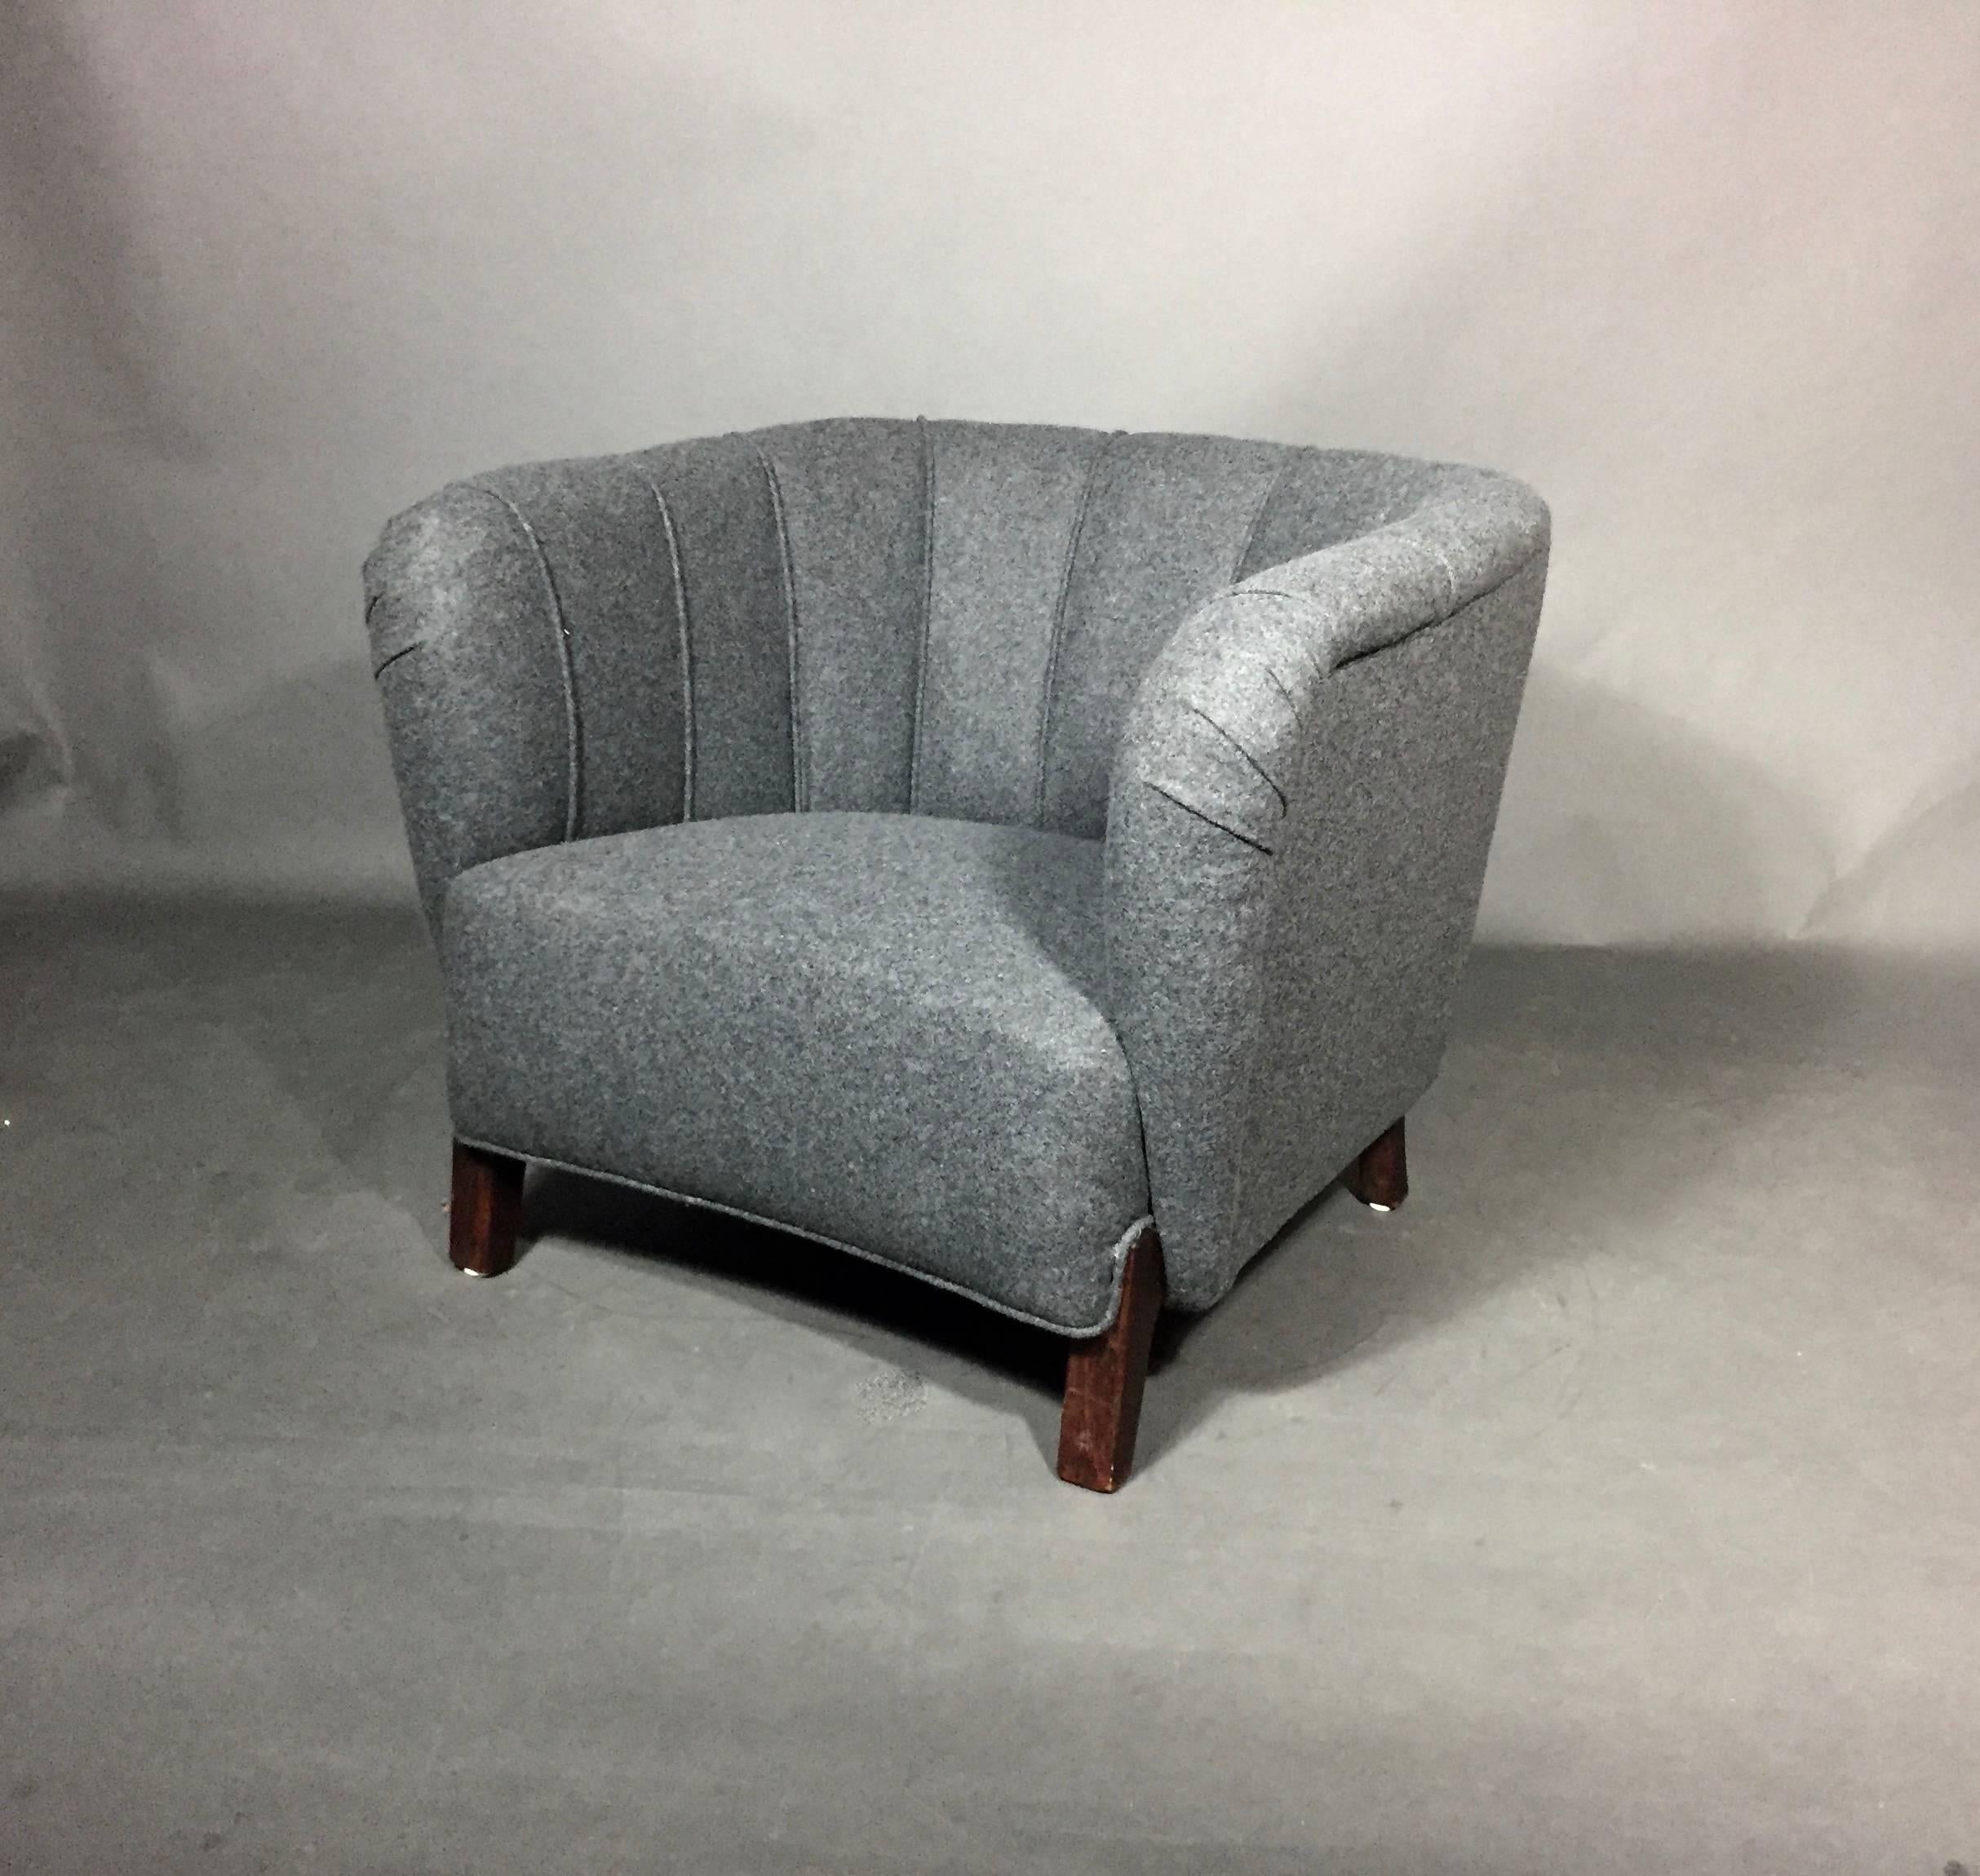 An unusual frame form on this 1940s Danish oversize club or lounge chair. Over padded angled front legs with curved front panel. Deep seat with nicely proportioned welting covering the curved back. New grey Kavadrat felted wool upholstery. Solid and